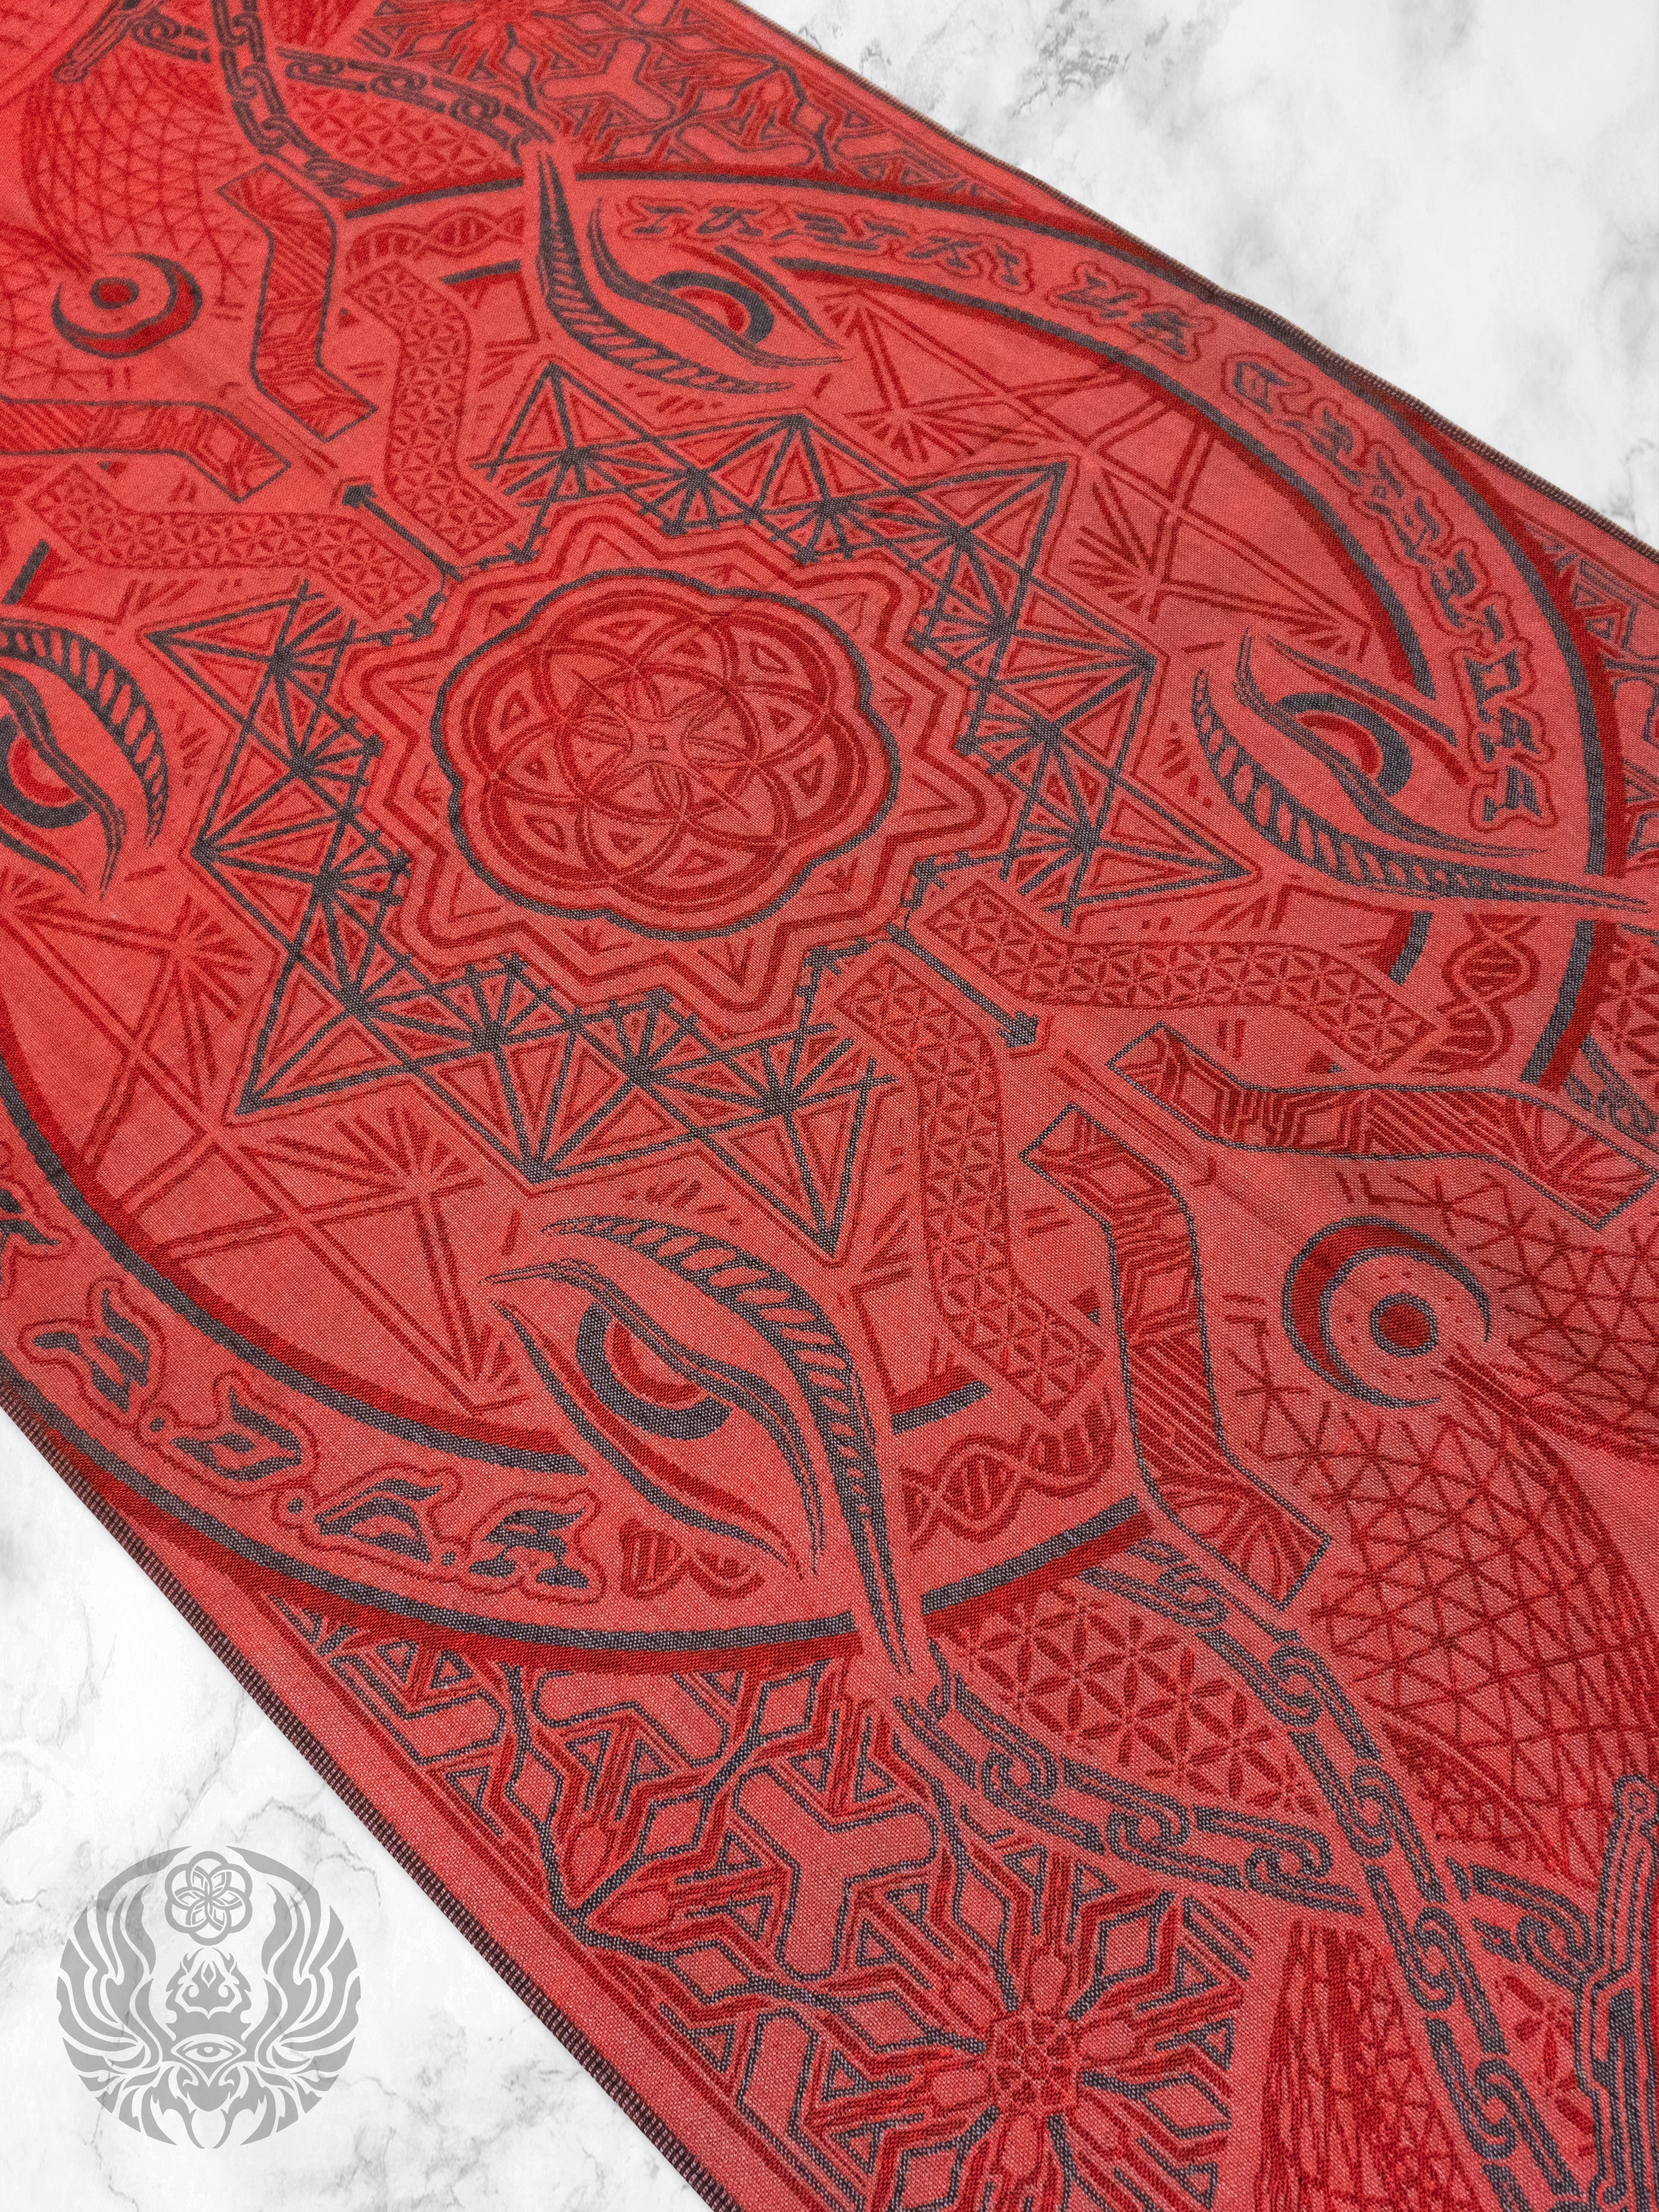 COMING SOON • PROTECTED BY INTENT • RED FESTIVAL SHAWL Shawls 